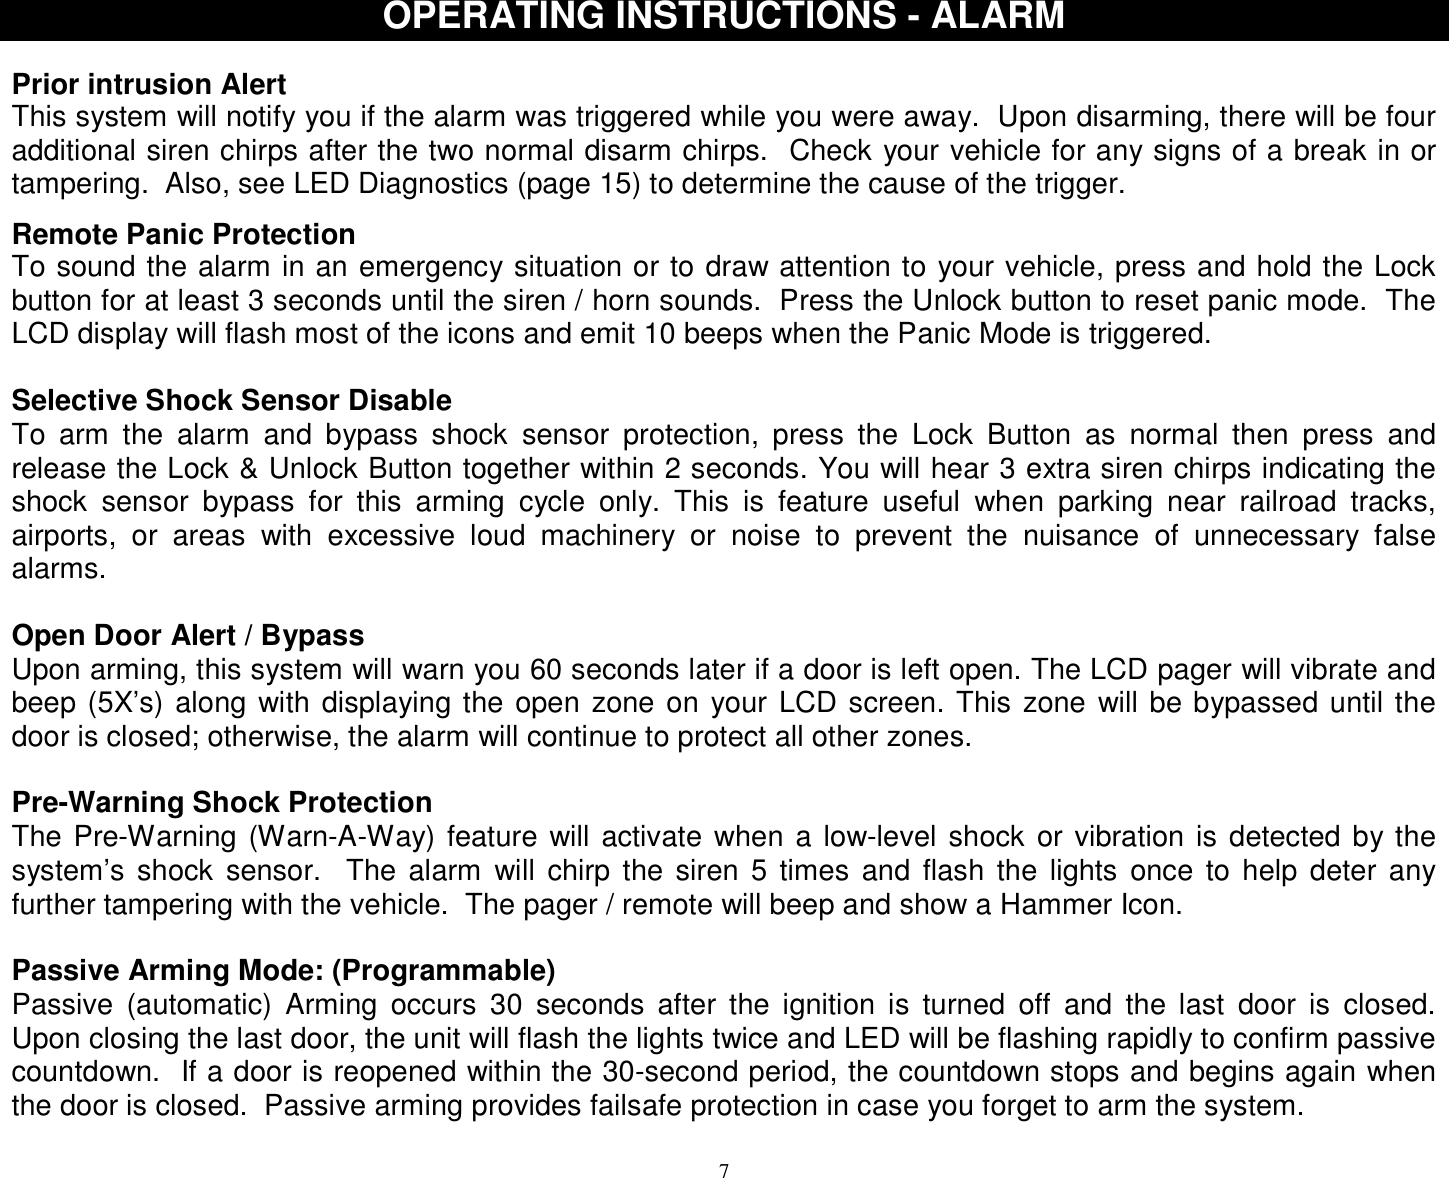  7OPERATING INSTRUCTIONS - ALARM  Prior intrusion Alert This system will notify you if the alarm was triggered while you were away.  Upon disarming, there will be four additional siren chirps after the two normal disarm chirps.  Check your vehicle for any signs of a break in or tampering.  Also, see LED Diagnostics (page 15) to determine the cause of the trigger.  Remote Panic Protection To sound the alarm in an emergency situation or to draw attention to your vehicle, press and hold the Lock button for at least 3 seconds until the siren / horn sounds.  Press the Unlock button to reset panic mode.  The LCD display will flash most of the icons and emit 10 beeps when the Panic Mode is triggered.  Selective Shock Sensor Disable To arm the alarm and bypass shock sensor protection, press the Lock Button as normal then press and release the Lock &amp; Unlock Button together within 2 seconds. You will hear 3 extra siren chirps indicating the shock sensor bypass for this arming cycle only. This is feature useful when parking near railroad tracks, airports, or areas with excessive loud machinery or noise to prevent the nuisance of unnecessary false alarms.  Open Door Alert / Bypass Upon arming, this system will warn you 60 seconds later if a door is left open. The LCD pager will vibrate and beep (5X’s) along with displaying the open zone on your LCD screen. This zone will be bypassed until the door is closed; otherwise, the alarm will continue to protect all other zones.  Pre-Warning Shock Protection The Pre-Warning (Warn-A-Way) feature will activate when a low-level shock or vibration is detected by the system’s shock sensor.  The alarm will chirp the siren 5 times and flash the lights once to help deter any further tampering with the vehicle.  The pager / remote will beep and show a Hammer Icon.  Passive Arming Mode: (Programmable) Passive (automatic) Arming occurs 30 seconds after the ignition is turned off and the last door is closed.  Upon closing the last door, the unit will flash the lights twice and LED will be flashing rapidly to confirm passive countdown.  If a door is reopened within the 30-second period, the countdown stops and begins again when the door is closed.  Passive arming provides failsafe protection in case you forget to arm the system.  